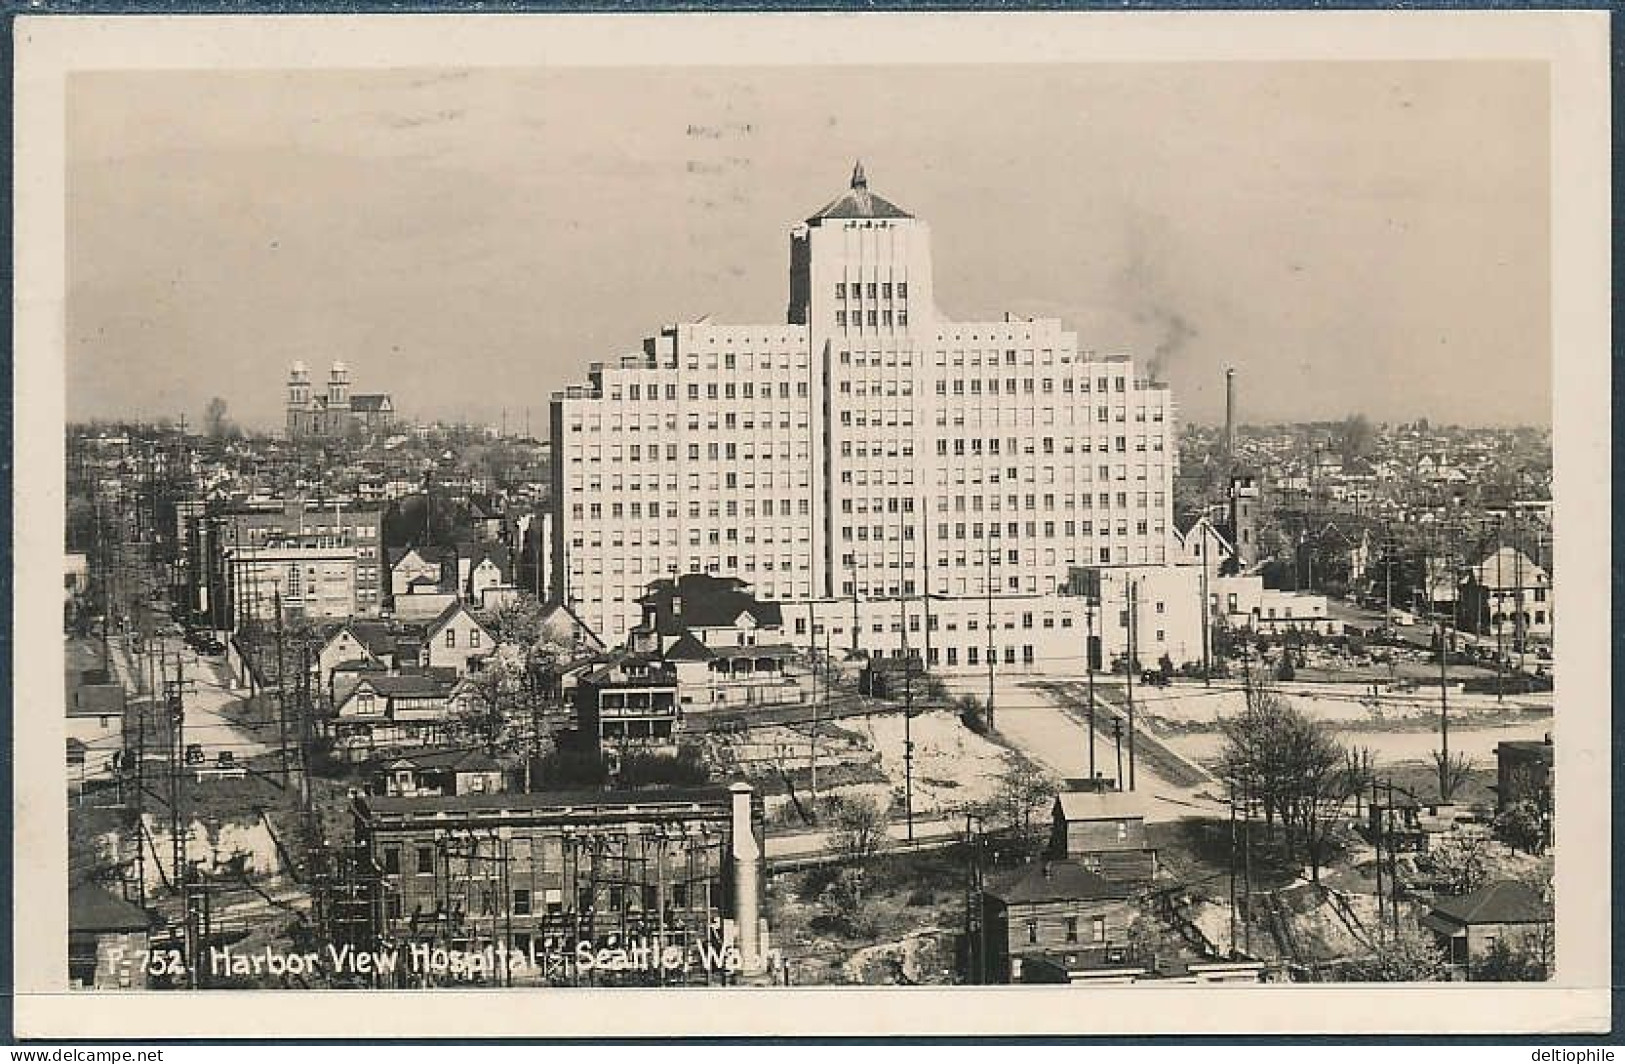 Harbor View Hospital, Seattle, Wash. / Prexie, Real Photo Picture Postcard - Posted 1948 - Seattle